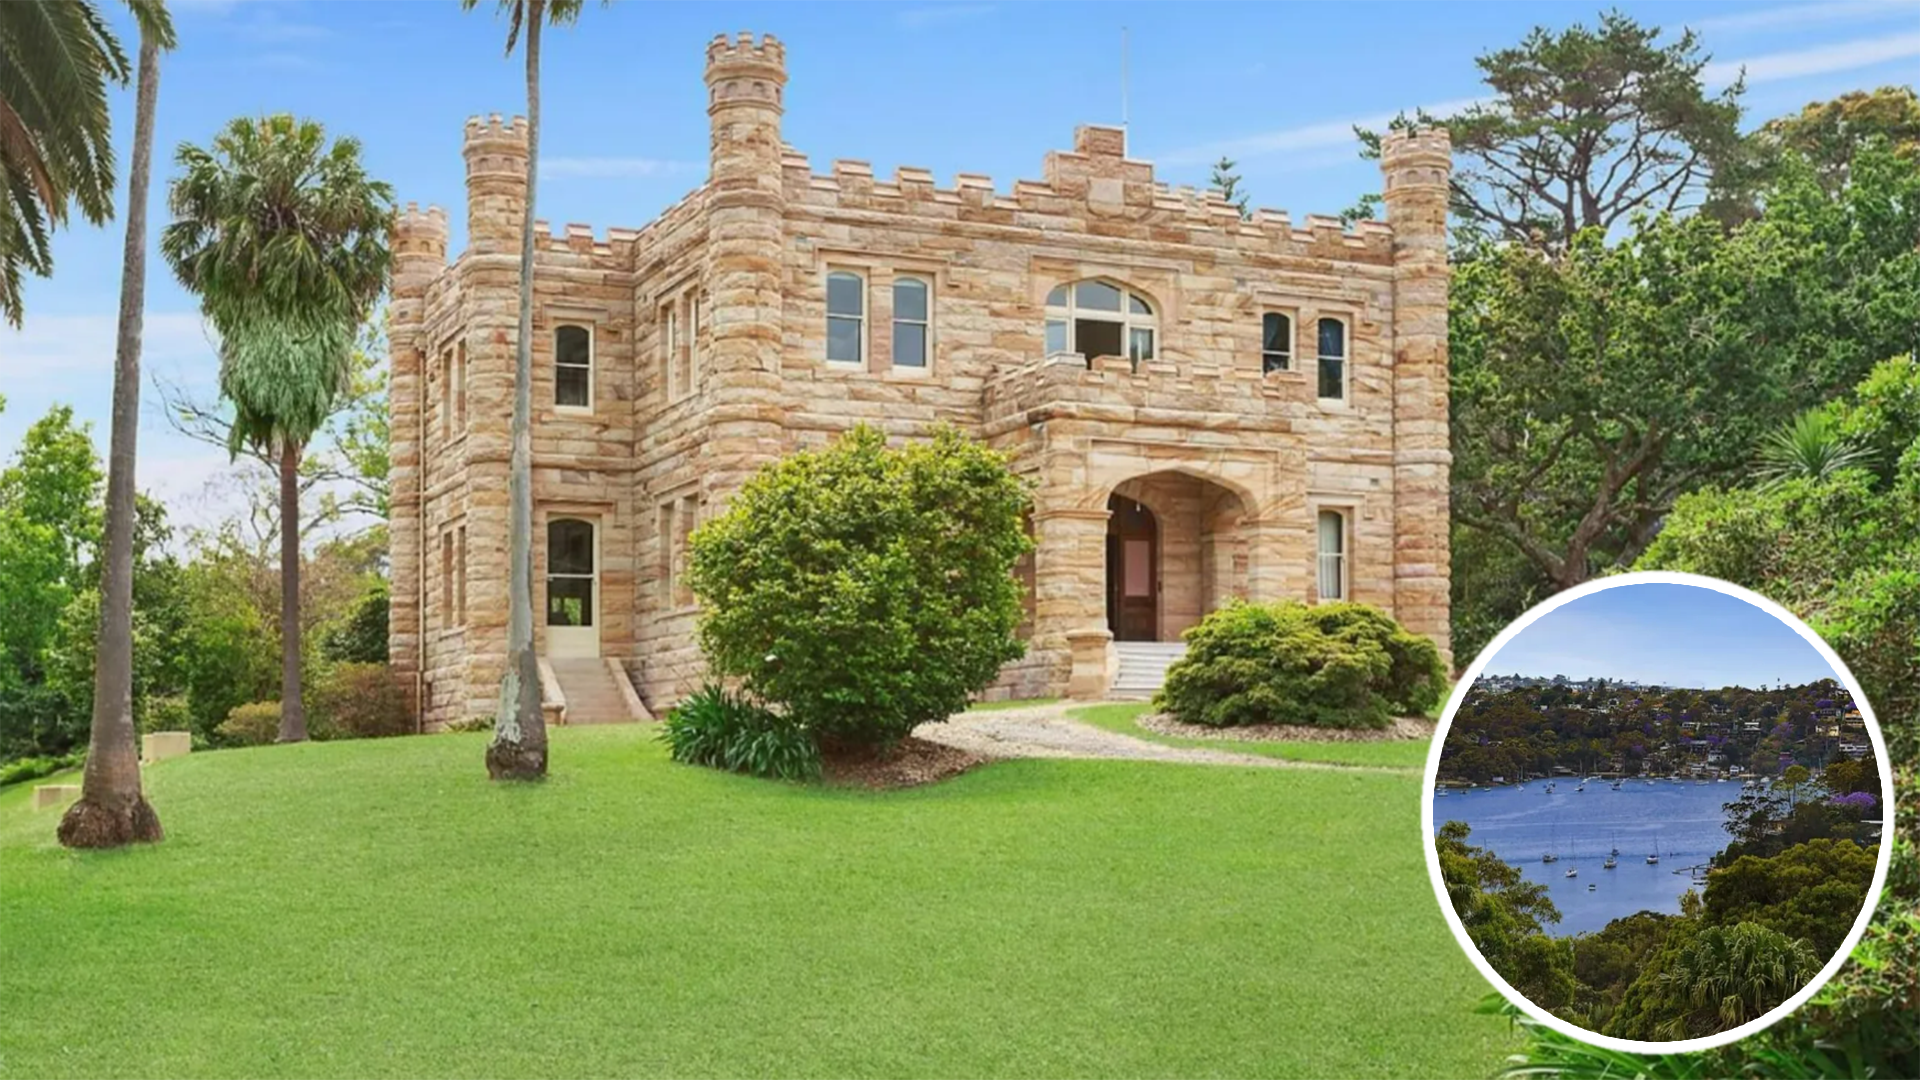 Sydney's own waterfront castle could be yours